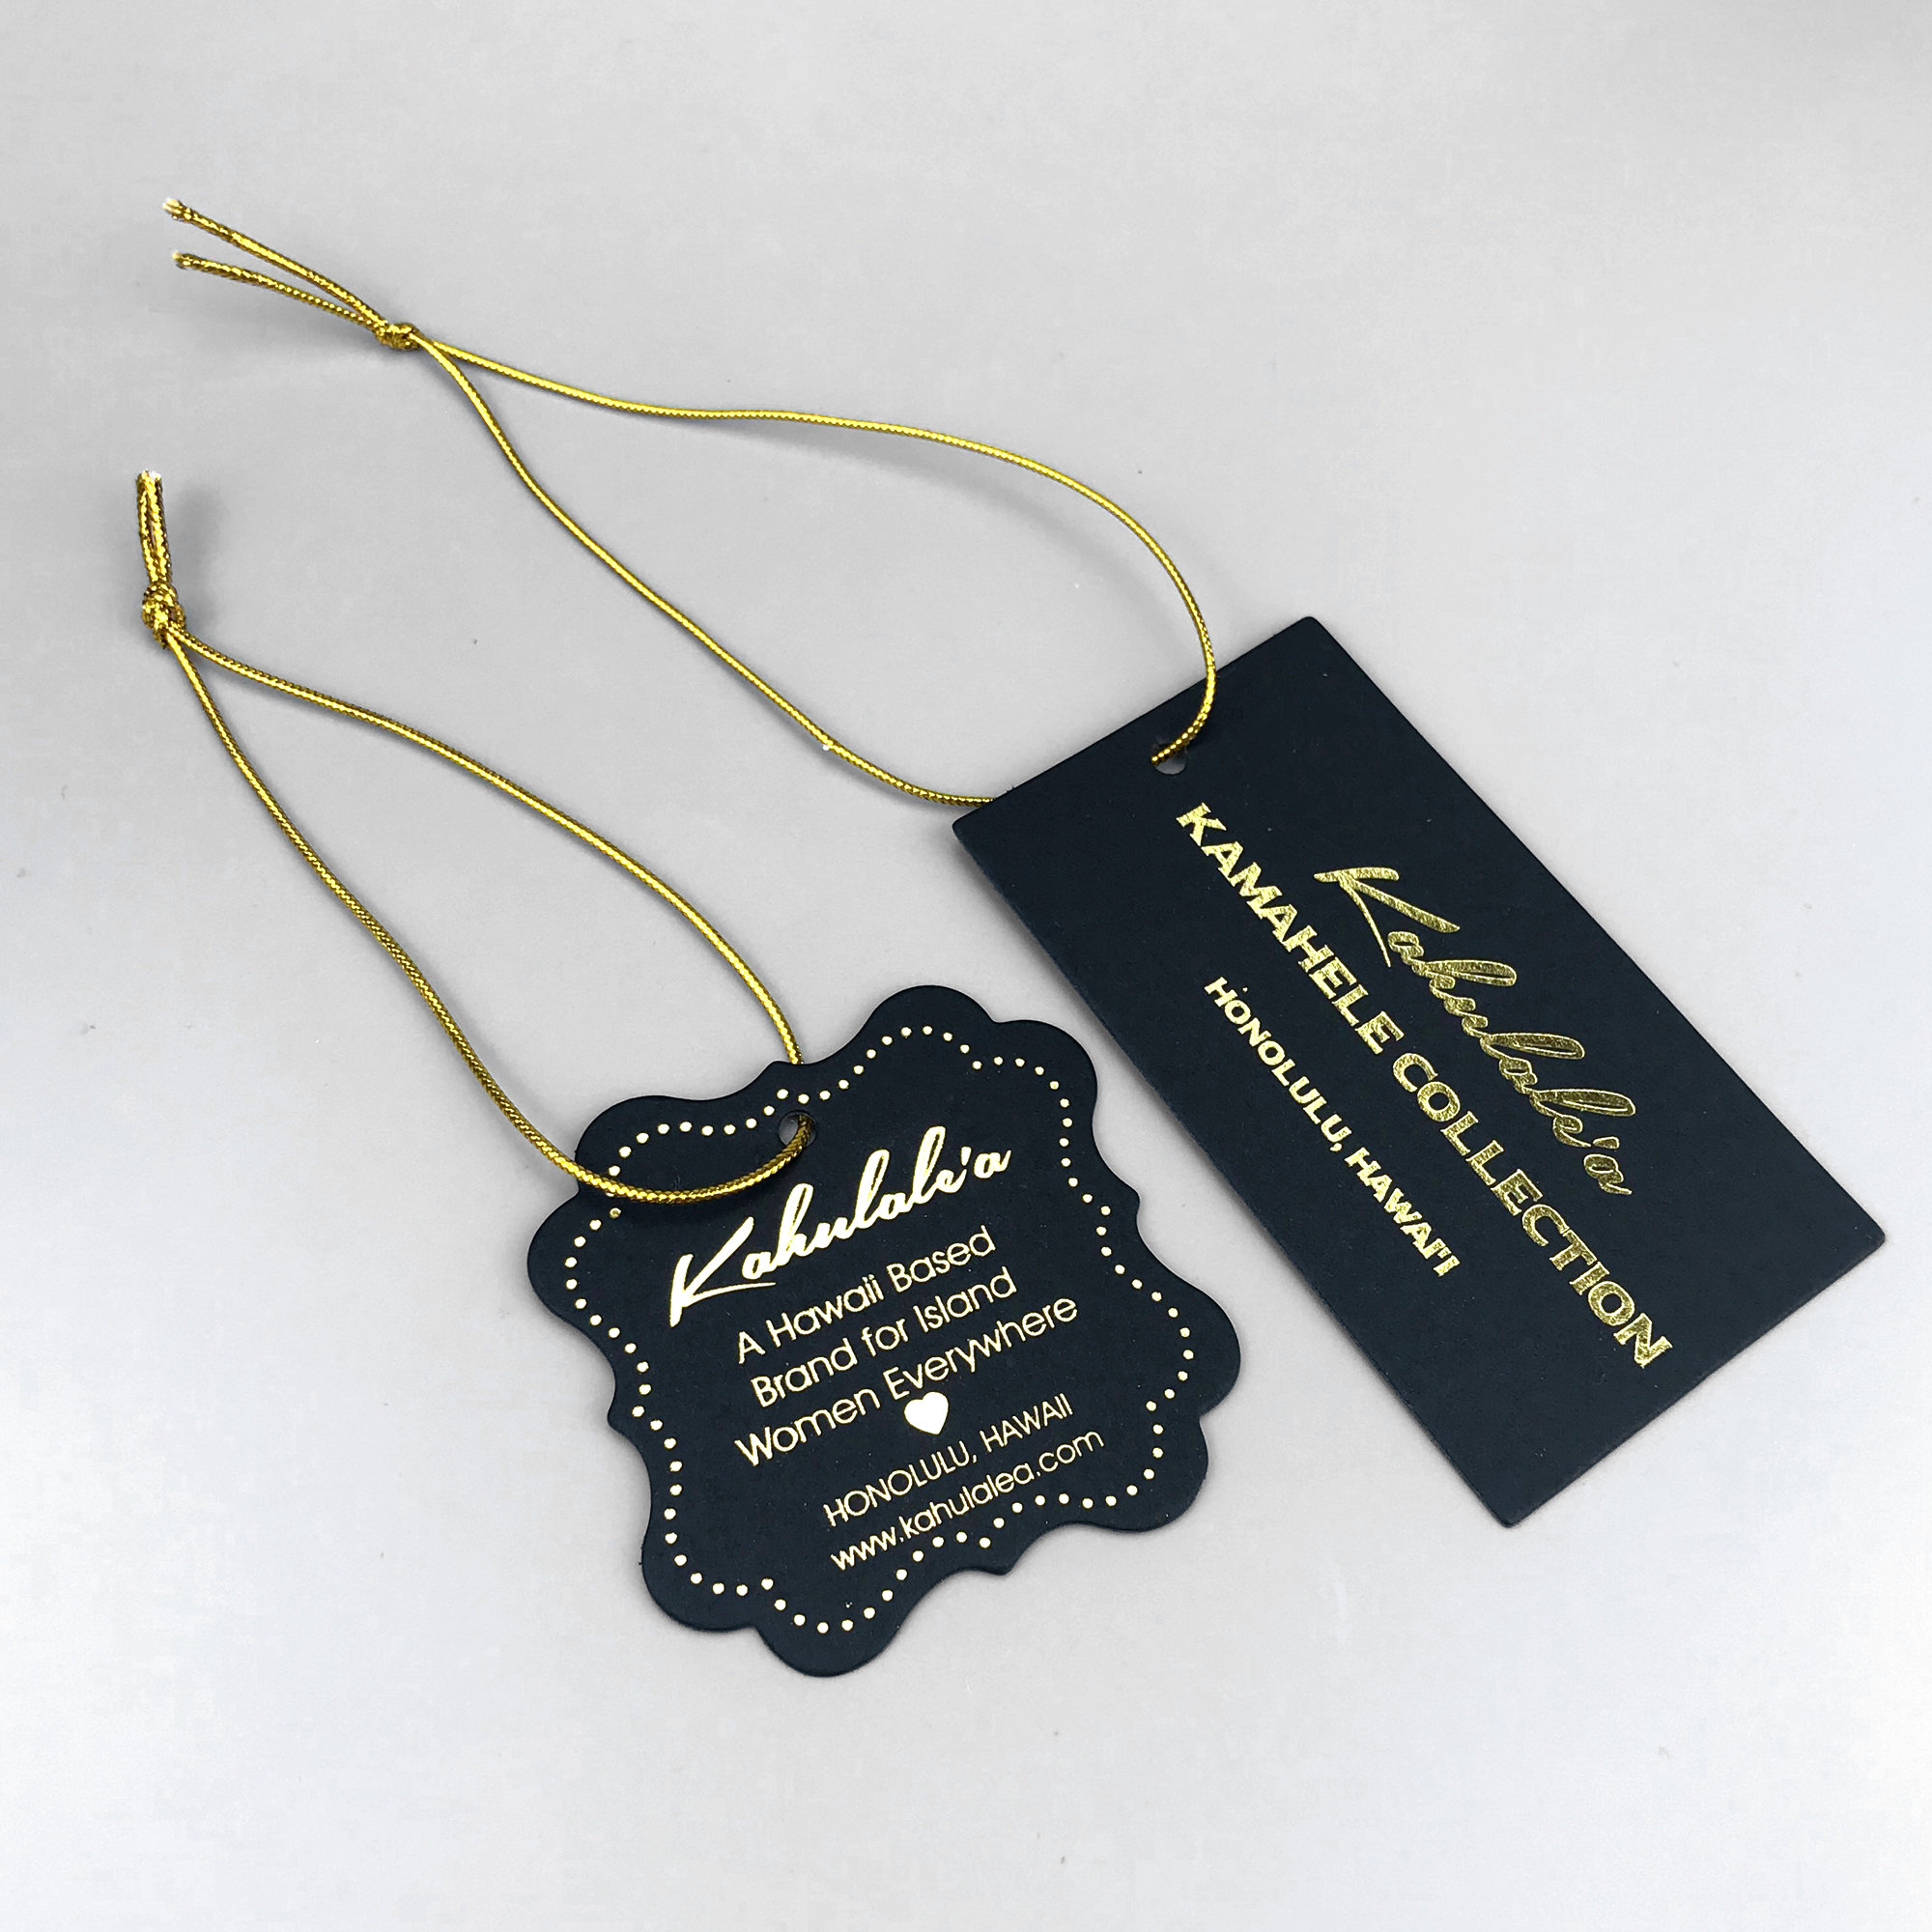 Custom-printed Hang Tags With Strings, Featuring Personalized Names,  Elegant Thank You Tags For Wedding Favors, Unique Clothing Labels For  Designers, Handcrafted Gift Tags For Special Events - Add A Personal Touch.  